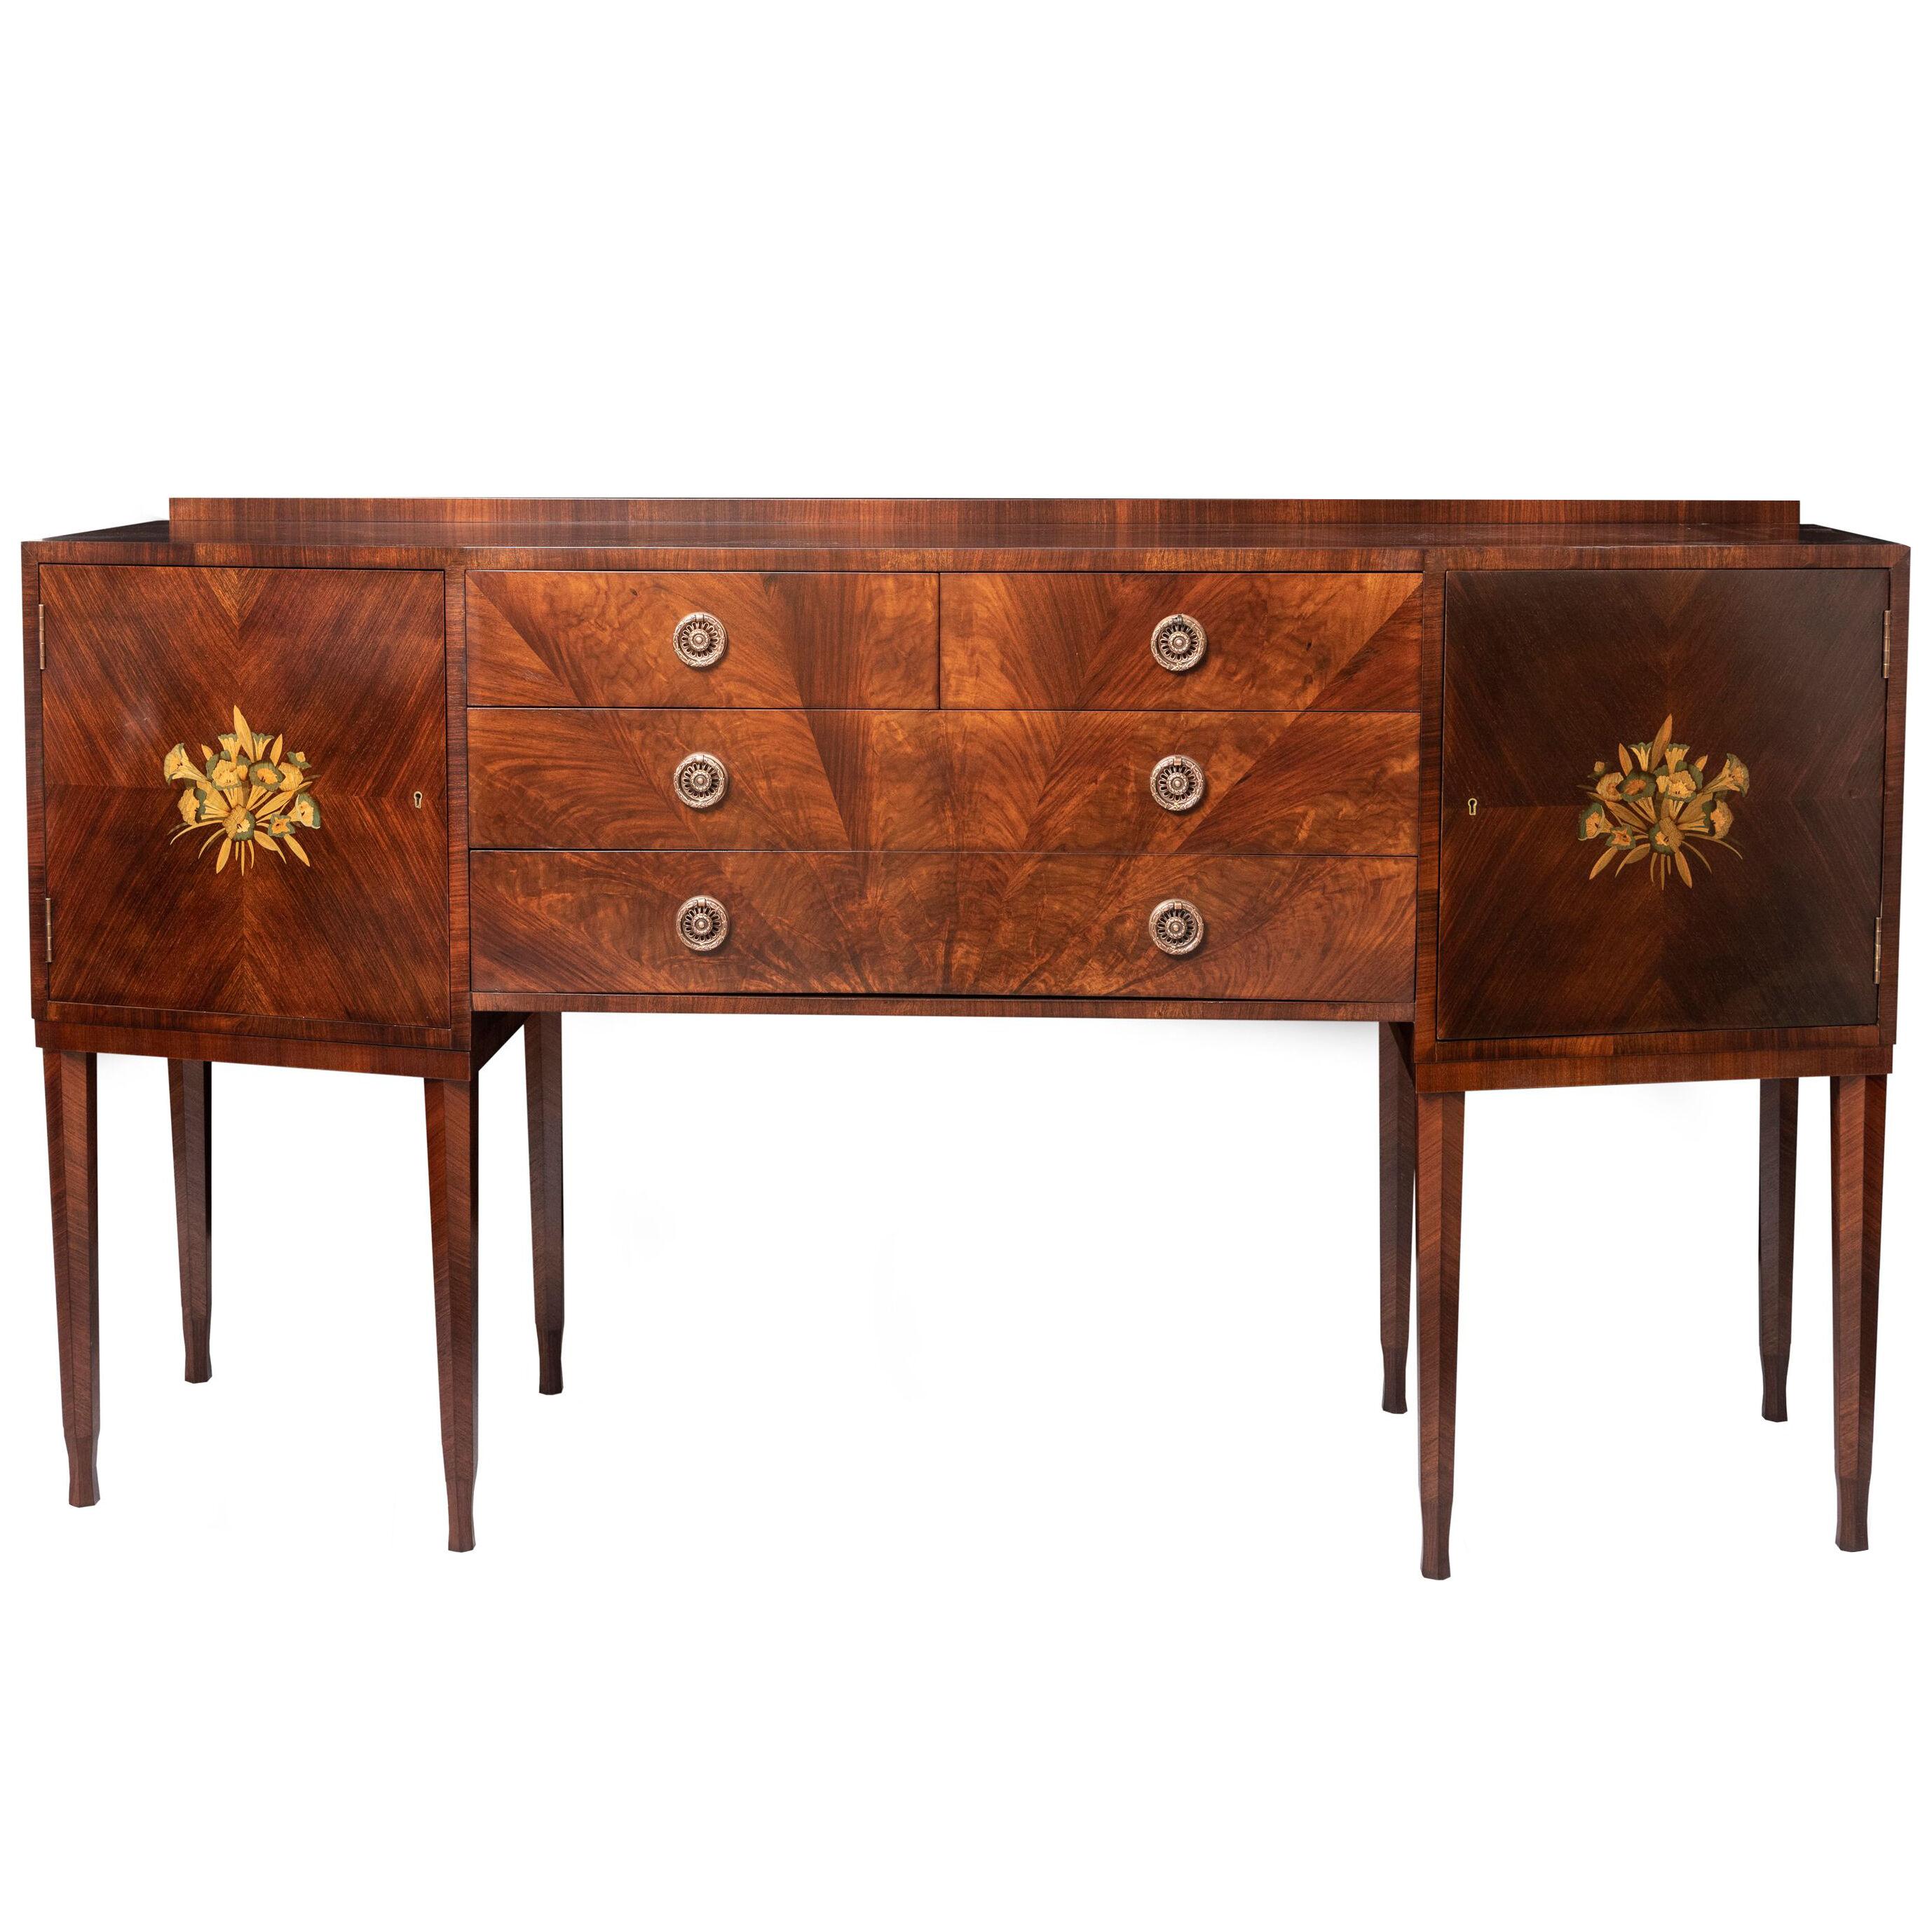 Sideboard attributed to Heals of London, England circa 1920